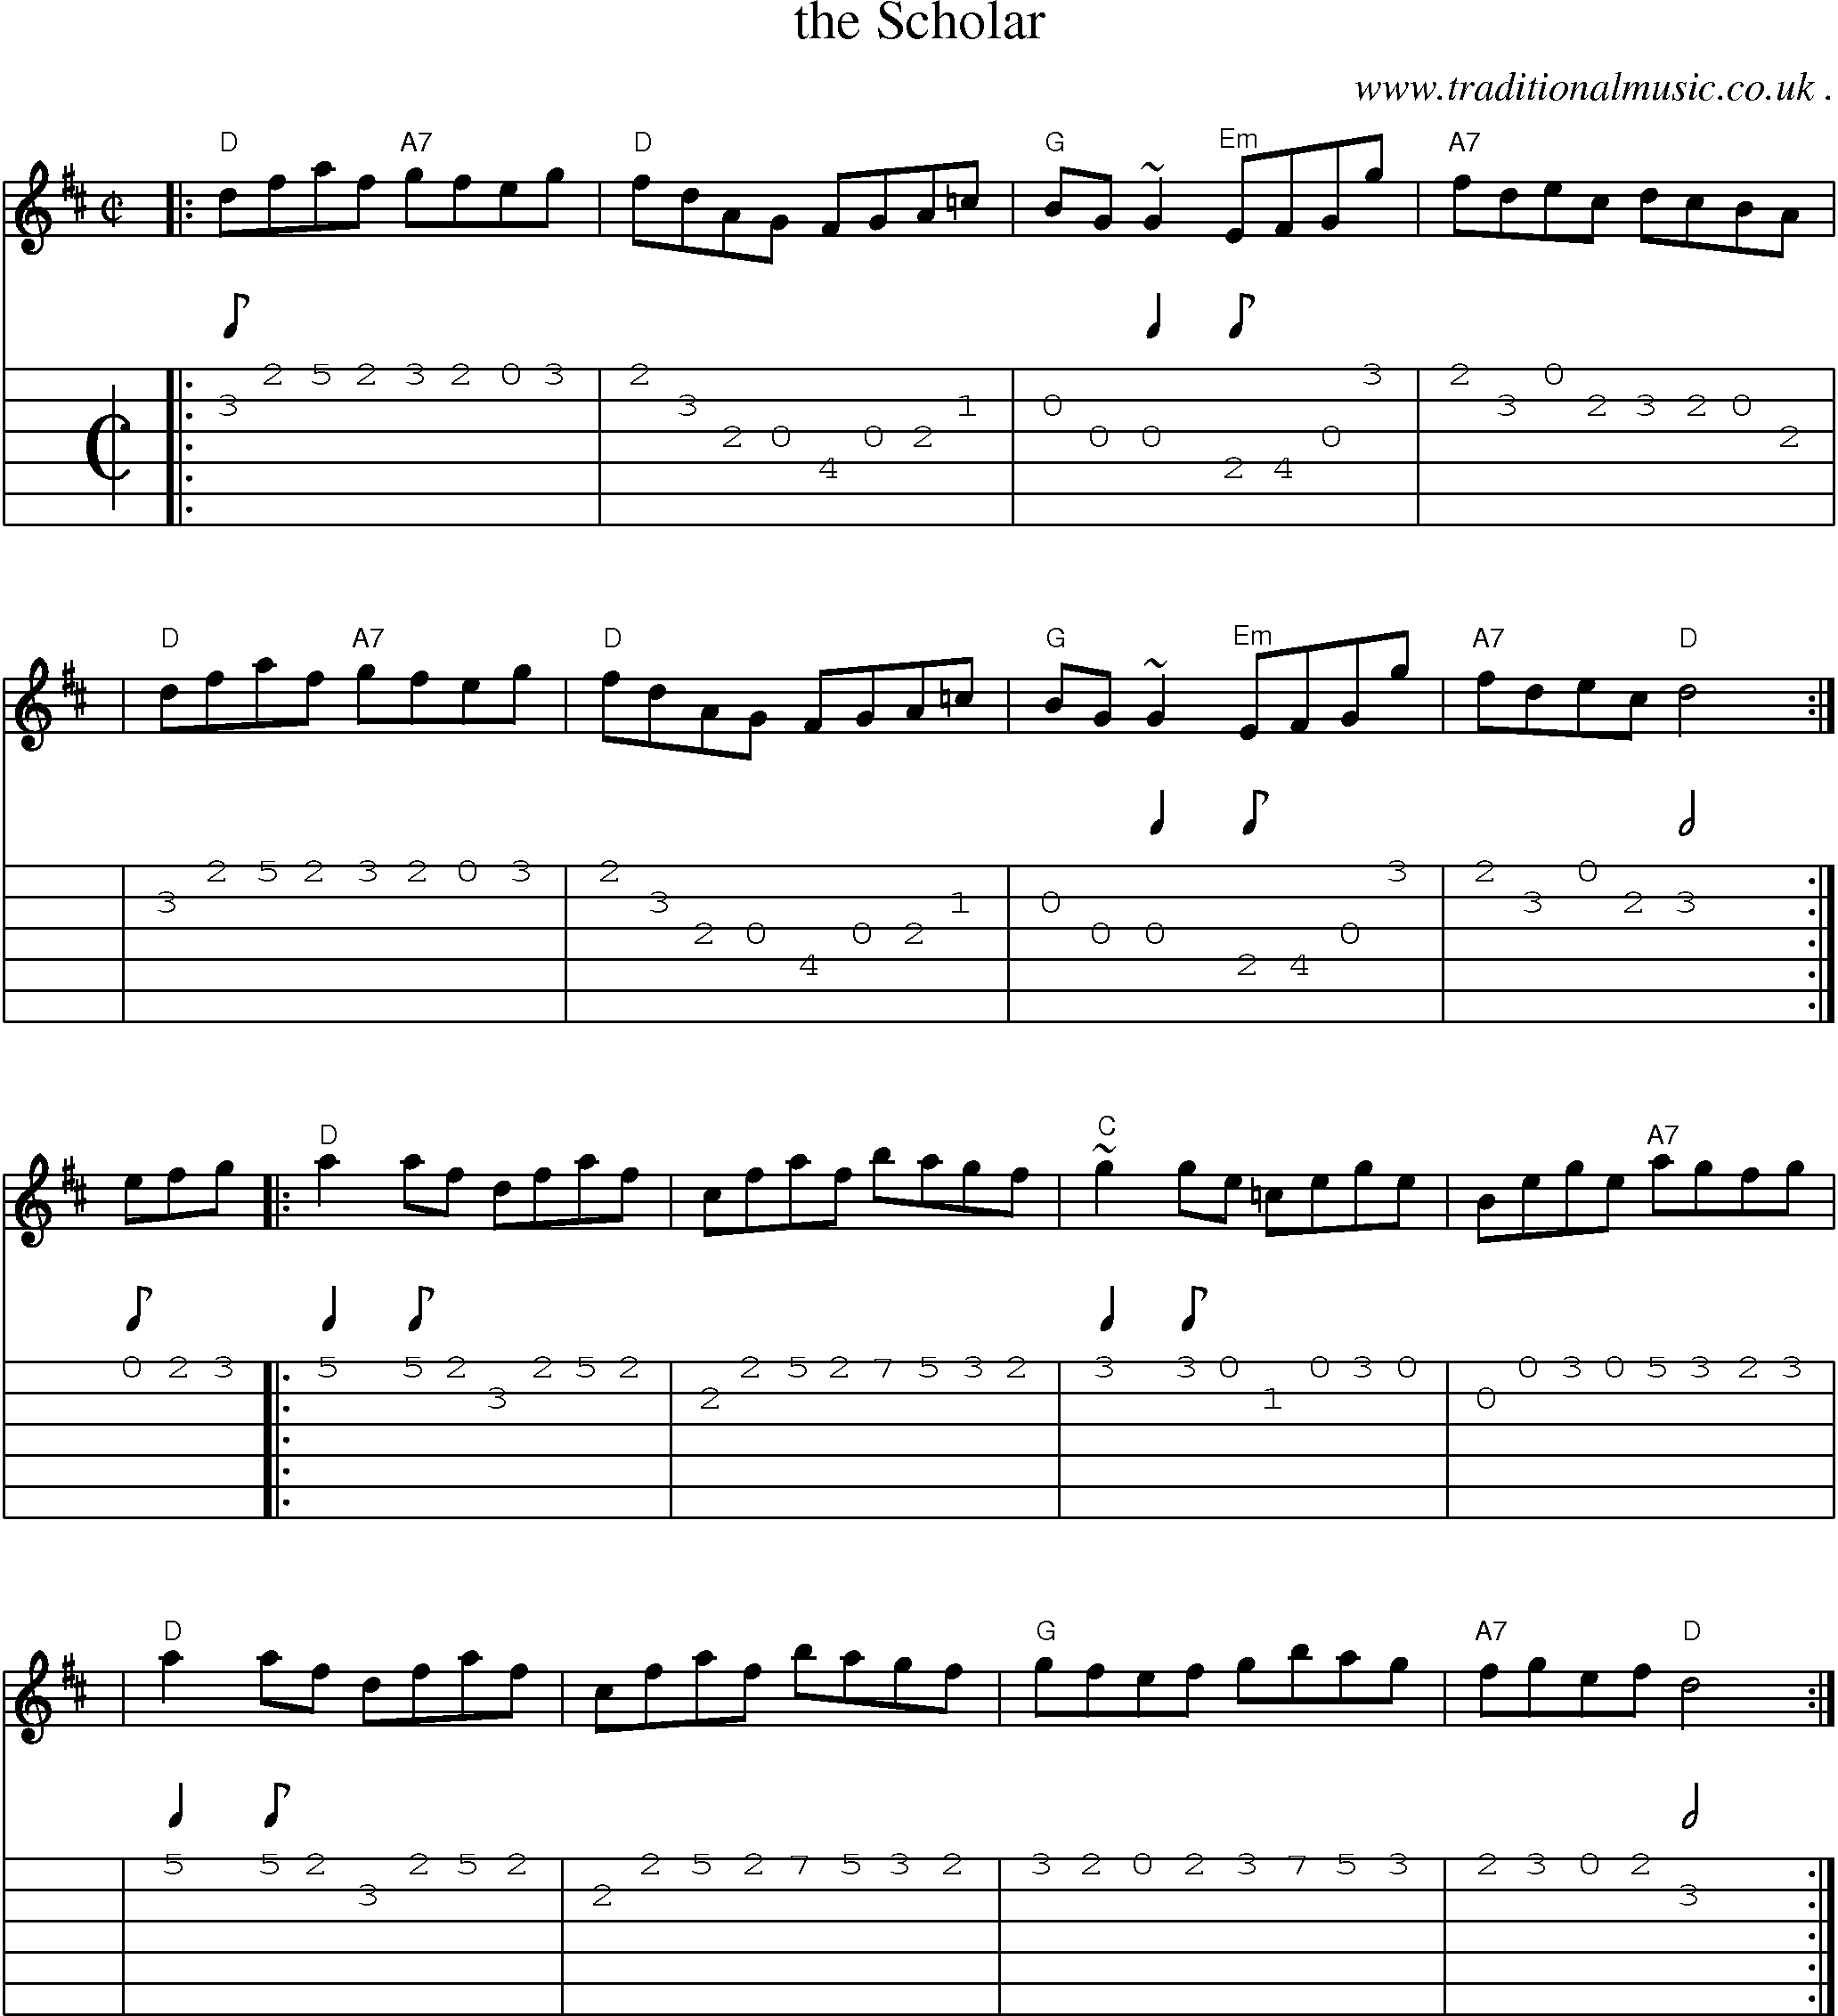 Sheet-music  score, Chords and Guitar Tabs for The Scholar